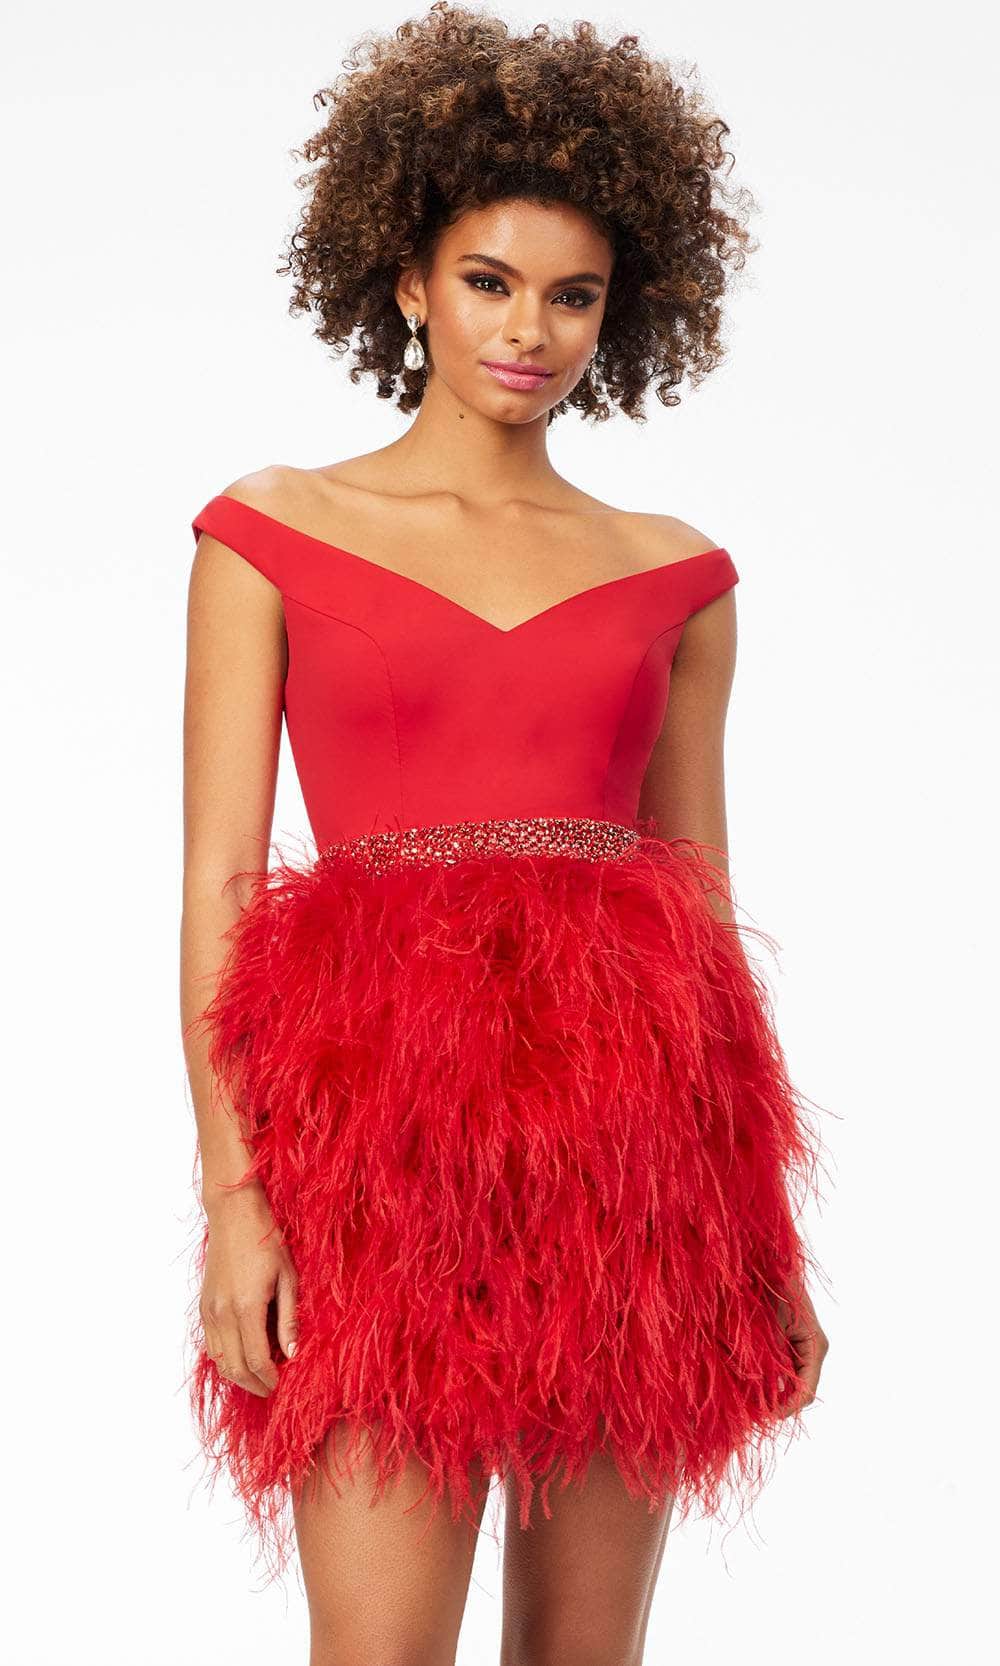 Ashley Lauren 4536 - Feathered Skirt Cocktail Dress Special Occasion Dress 0 / Red